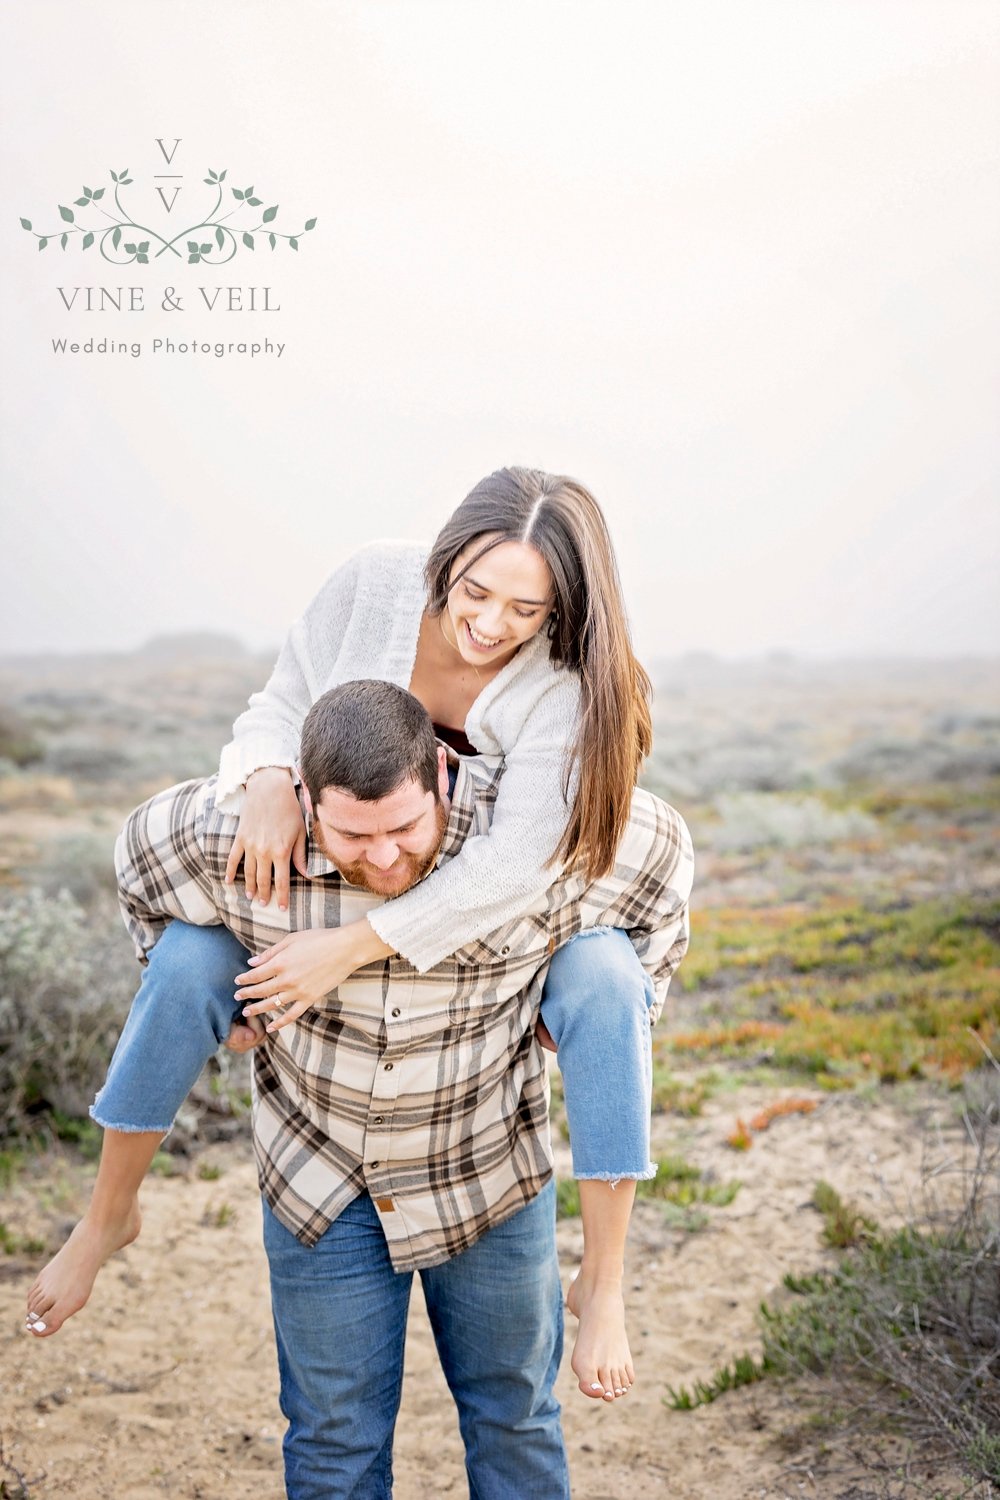 couple playing with a piggy back ride during an engagement photo session